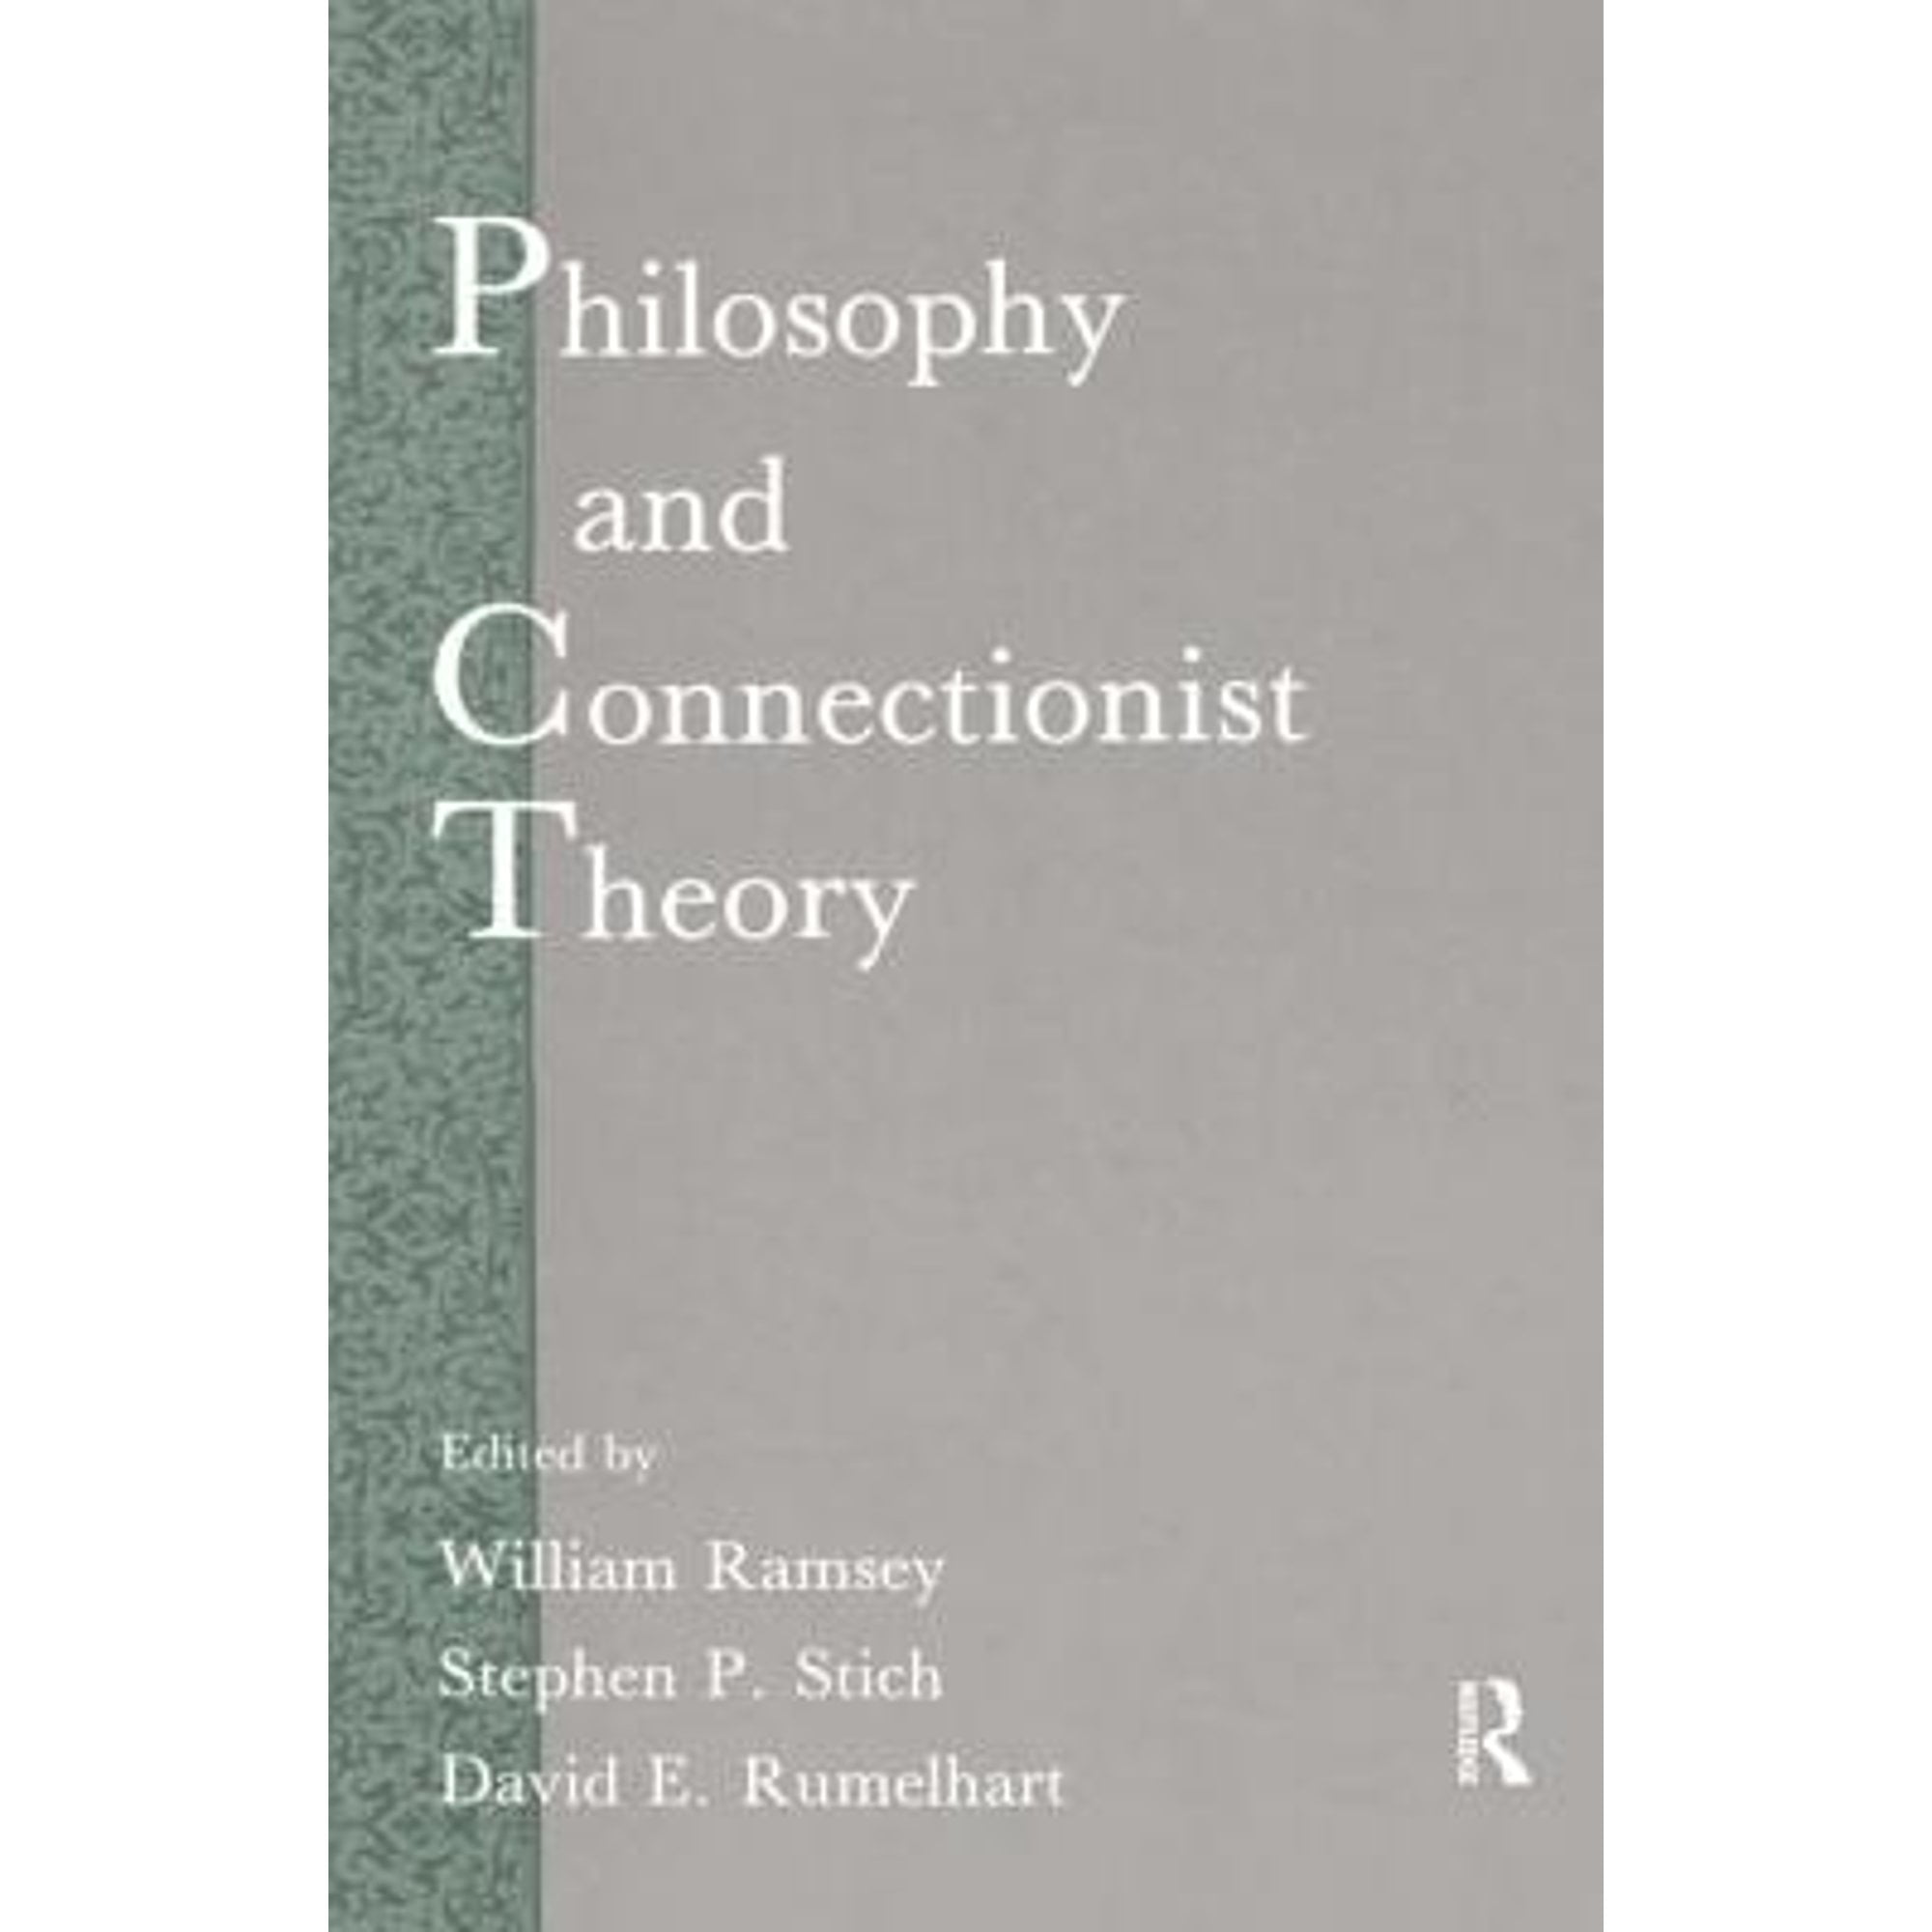 Pre-Owned Philosophy and Connectionist Theory (Hardcover 9780805805925) by William Ramsey, David E Rumelhart, Stephen P Stich